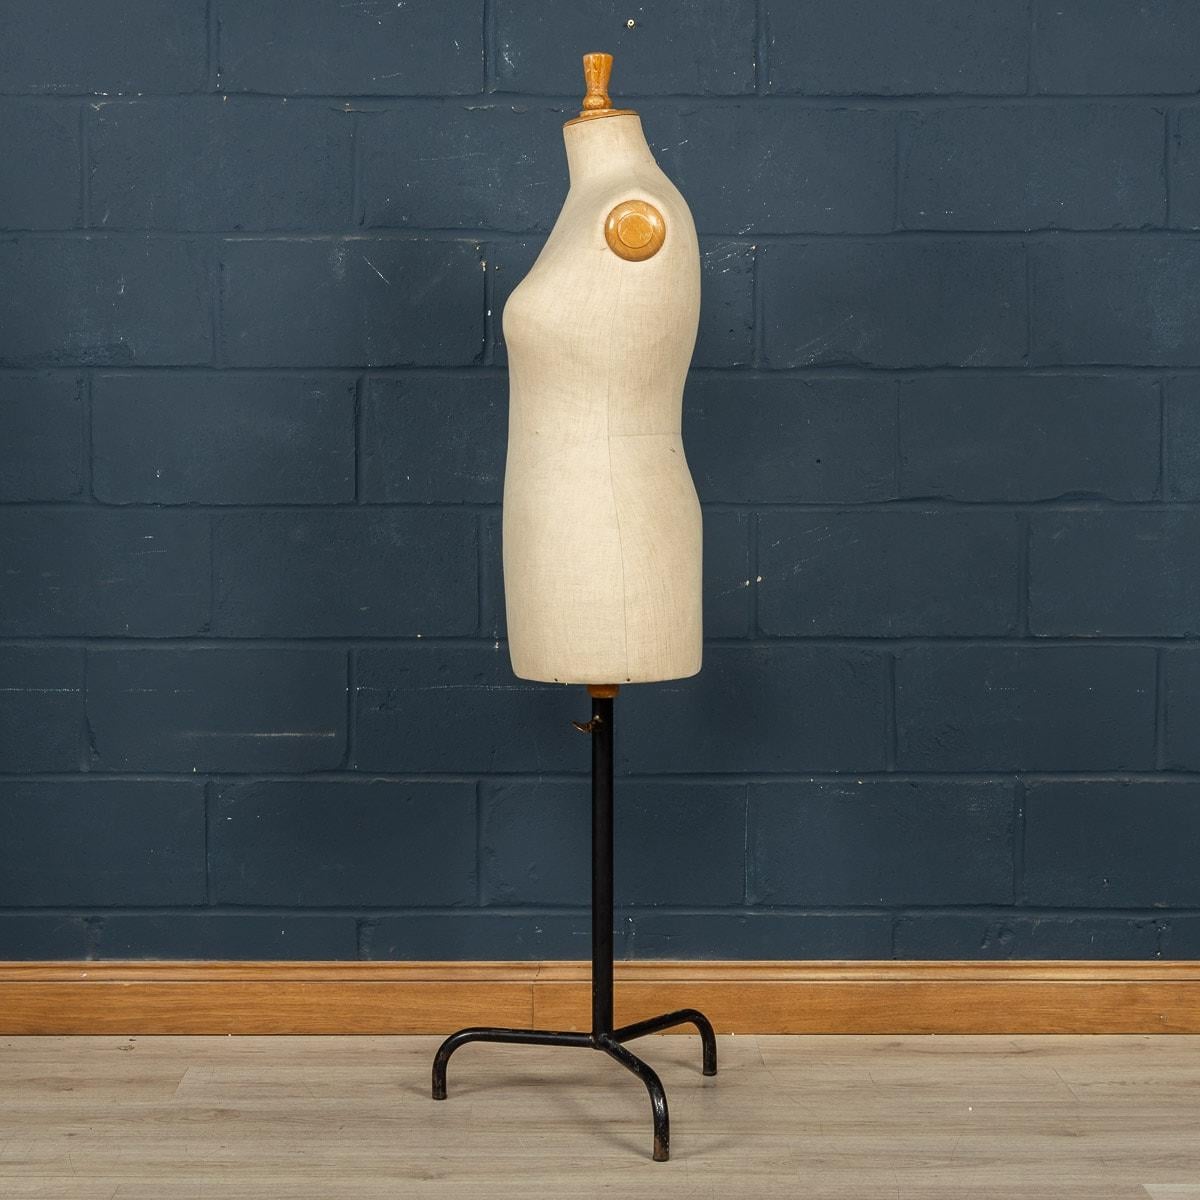 20th Century French Shop Mannequin By Buste Girard, c.1920 For Sale 1